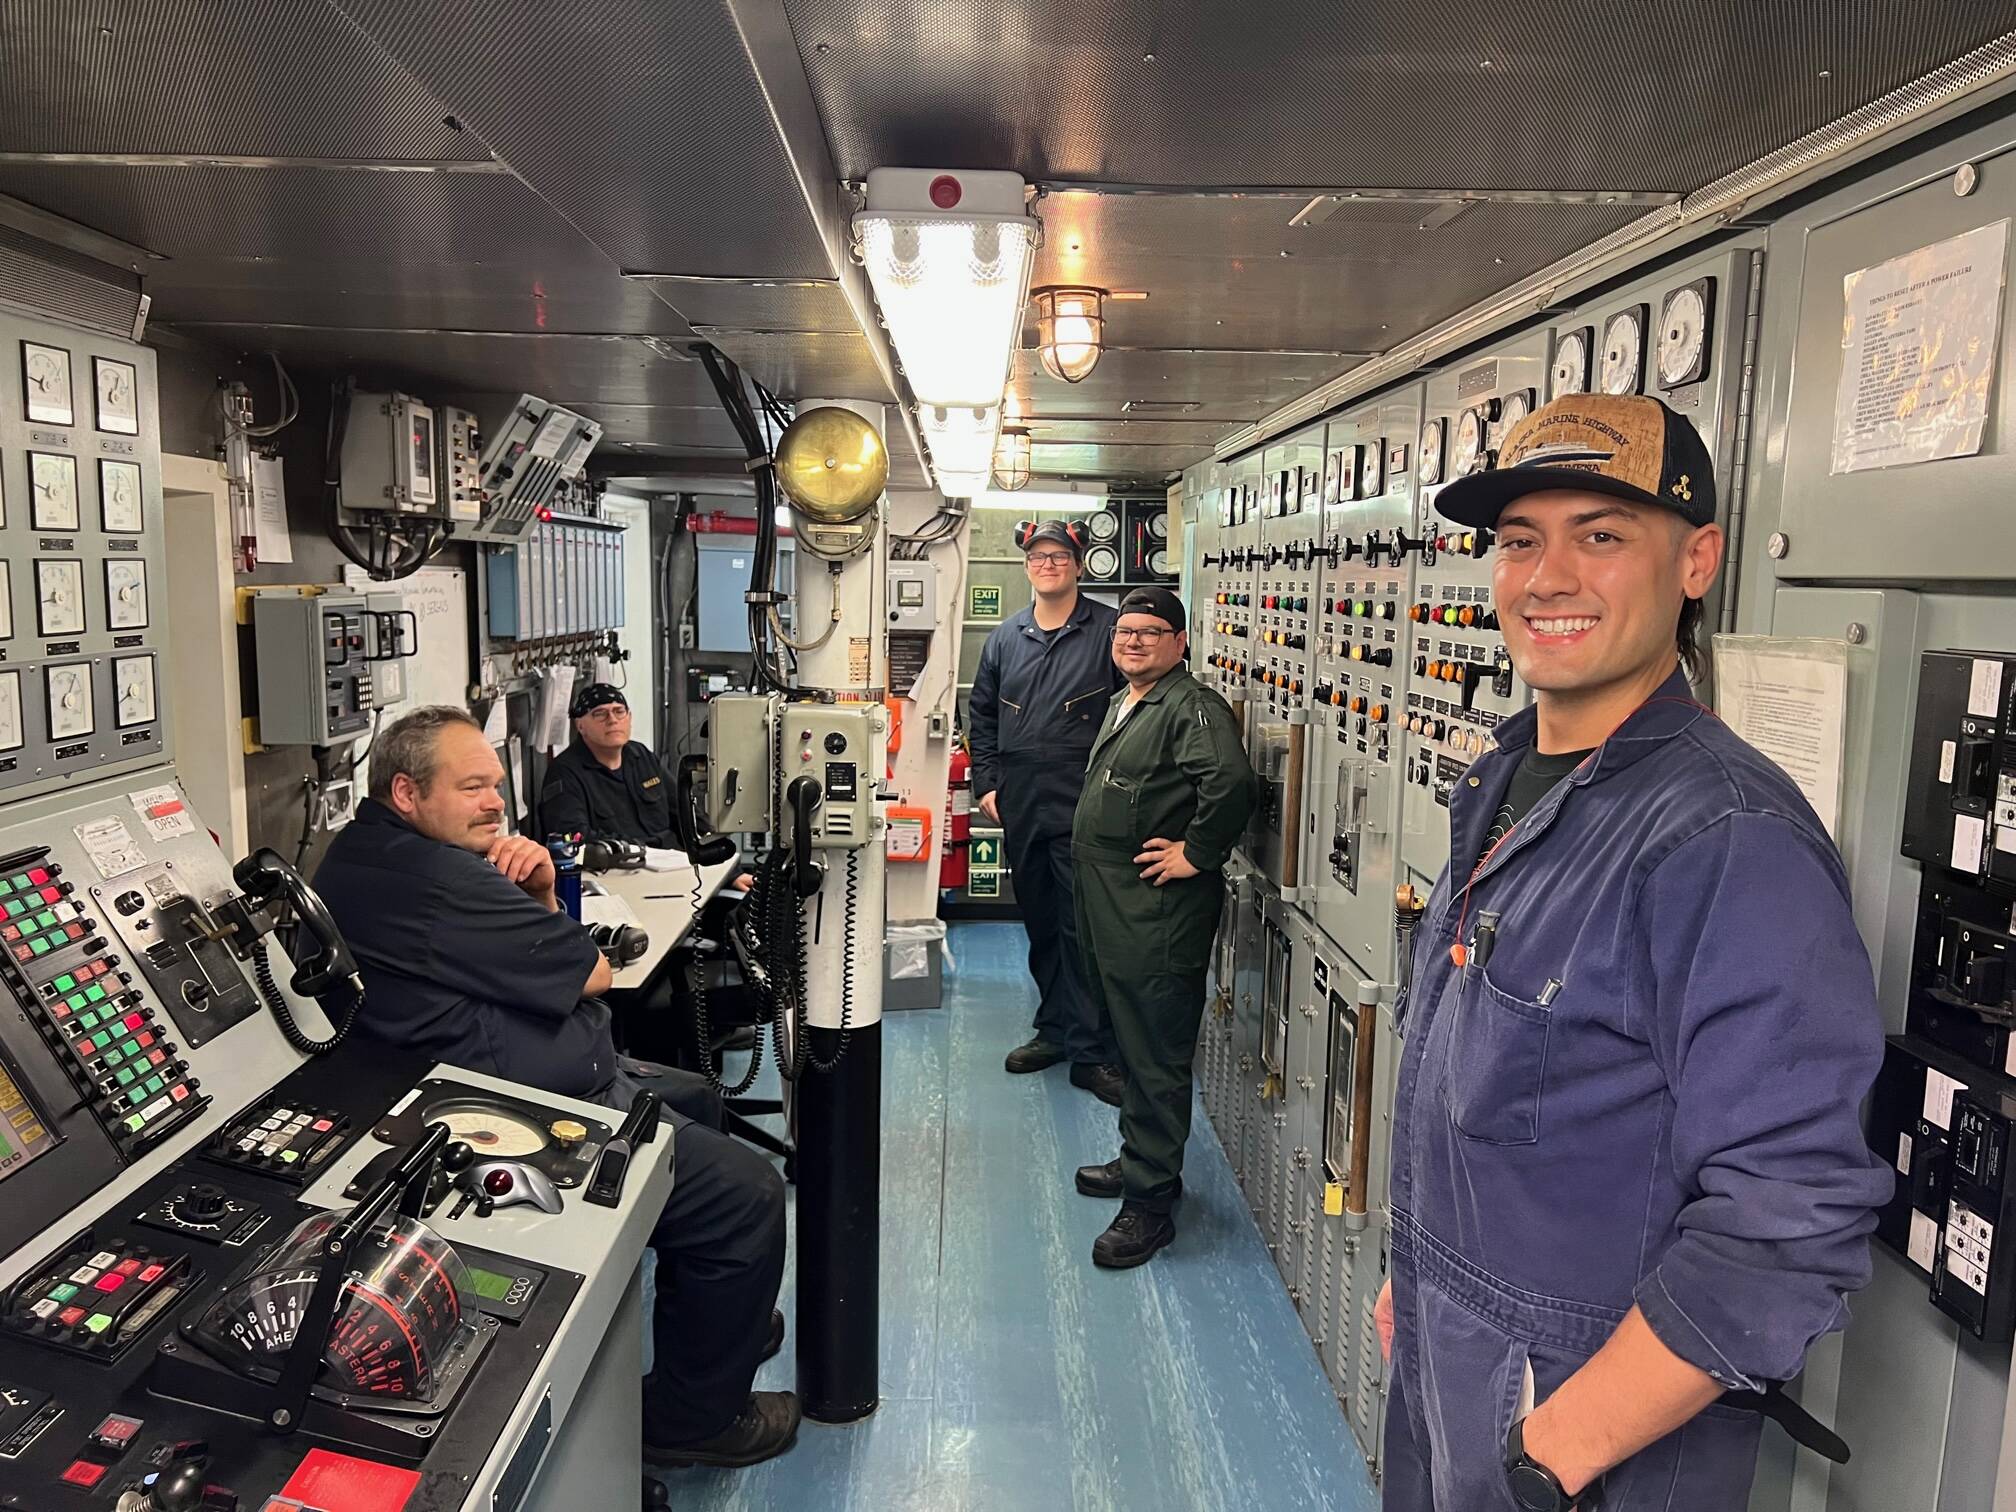 Second Engineer Tanner Greimann and other members of the engine department on board Columbia take a break while the ferry unloads and reloads in Wrangell in mid-July. From left to right: Mike Ladwig, wiper; Evan Hales, oiler; Robert McDougal, cadet; and Sergio Ortiz, third engineer. (Meredith Jordan / Juneau Empire)